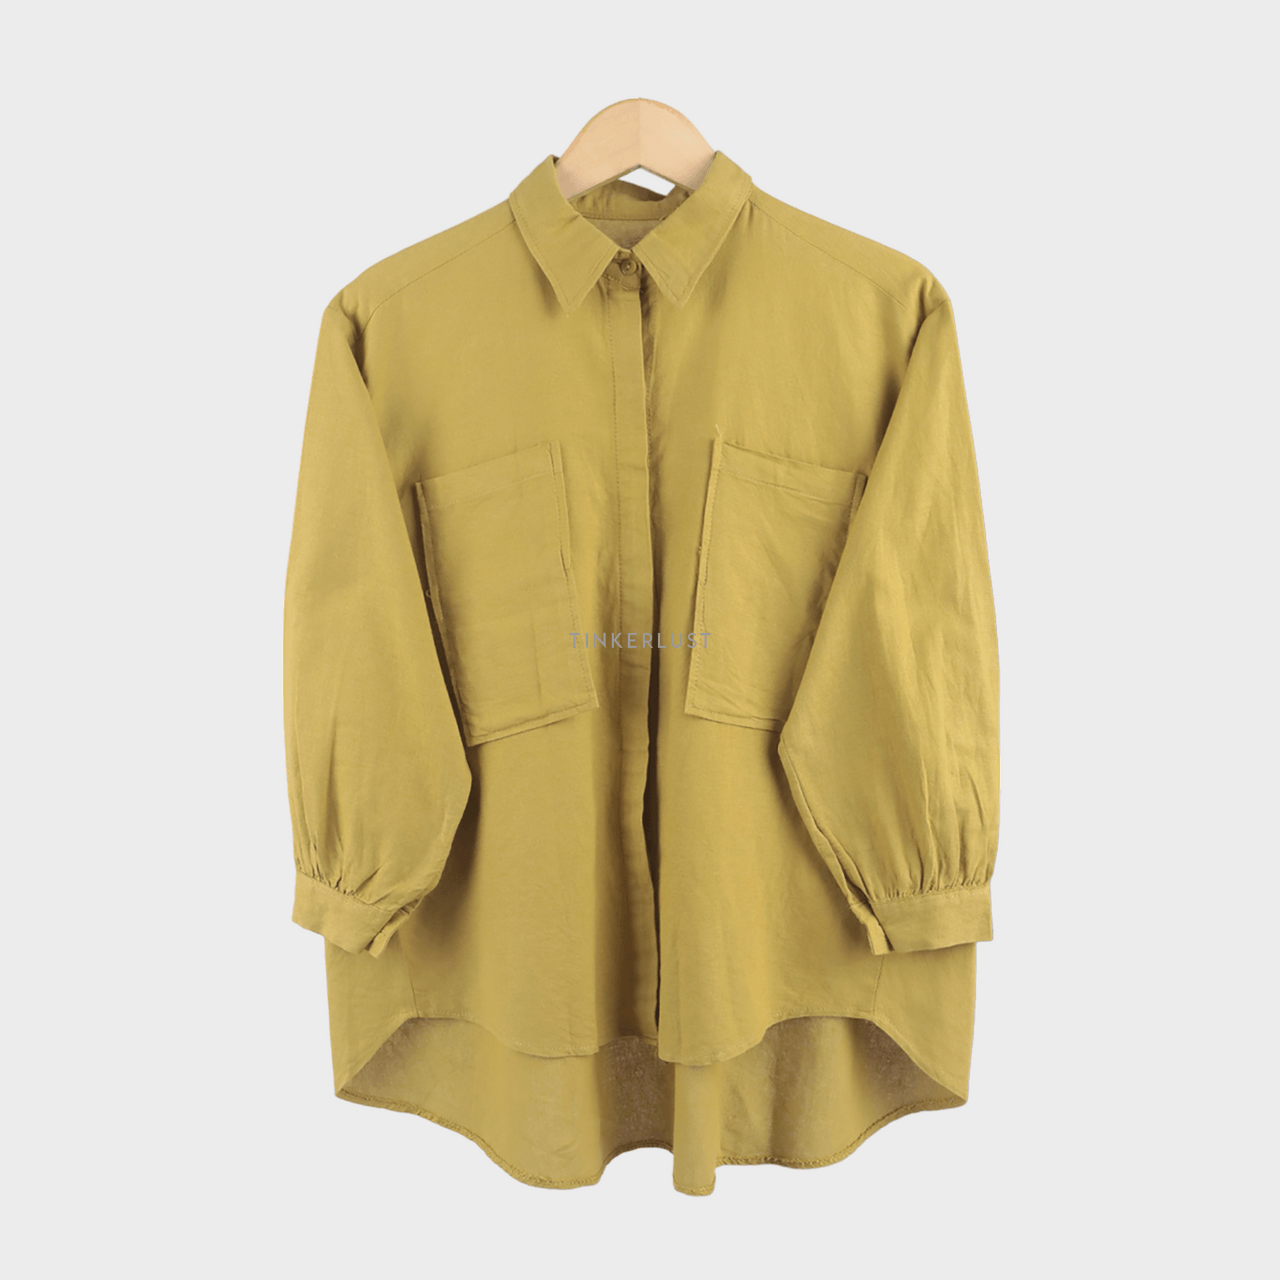 Private Collection Lime Shirt